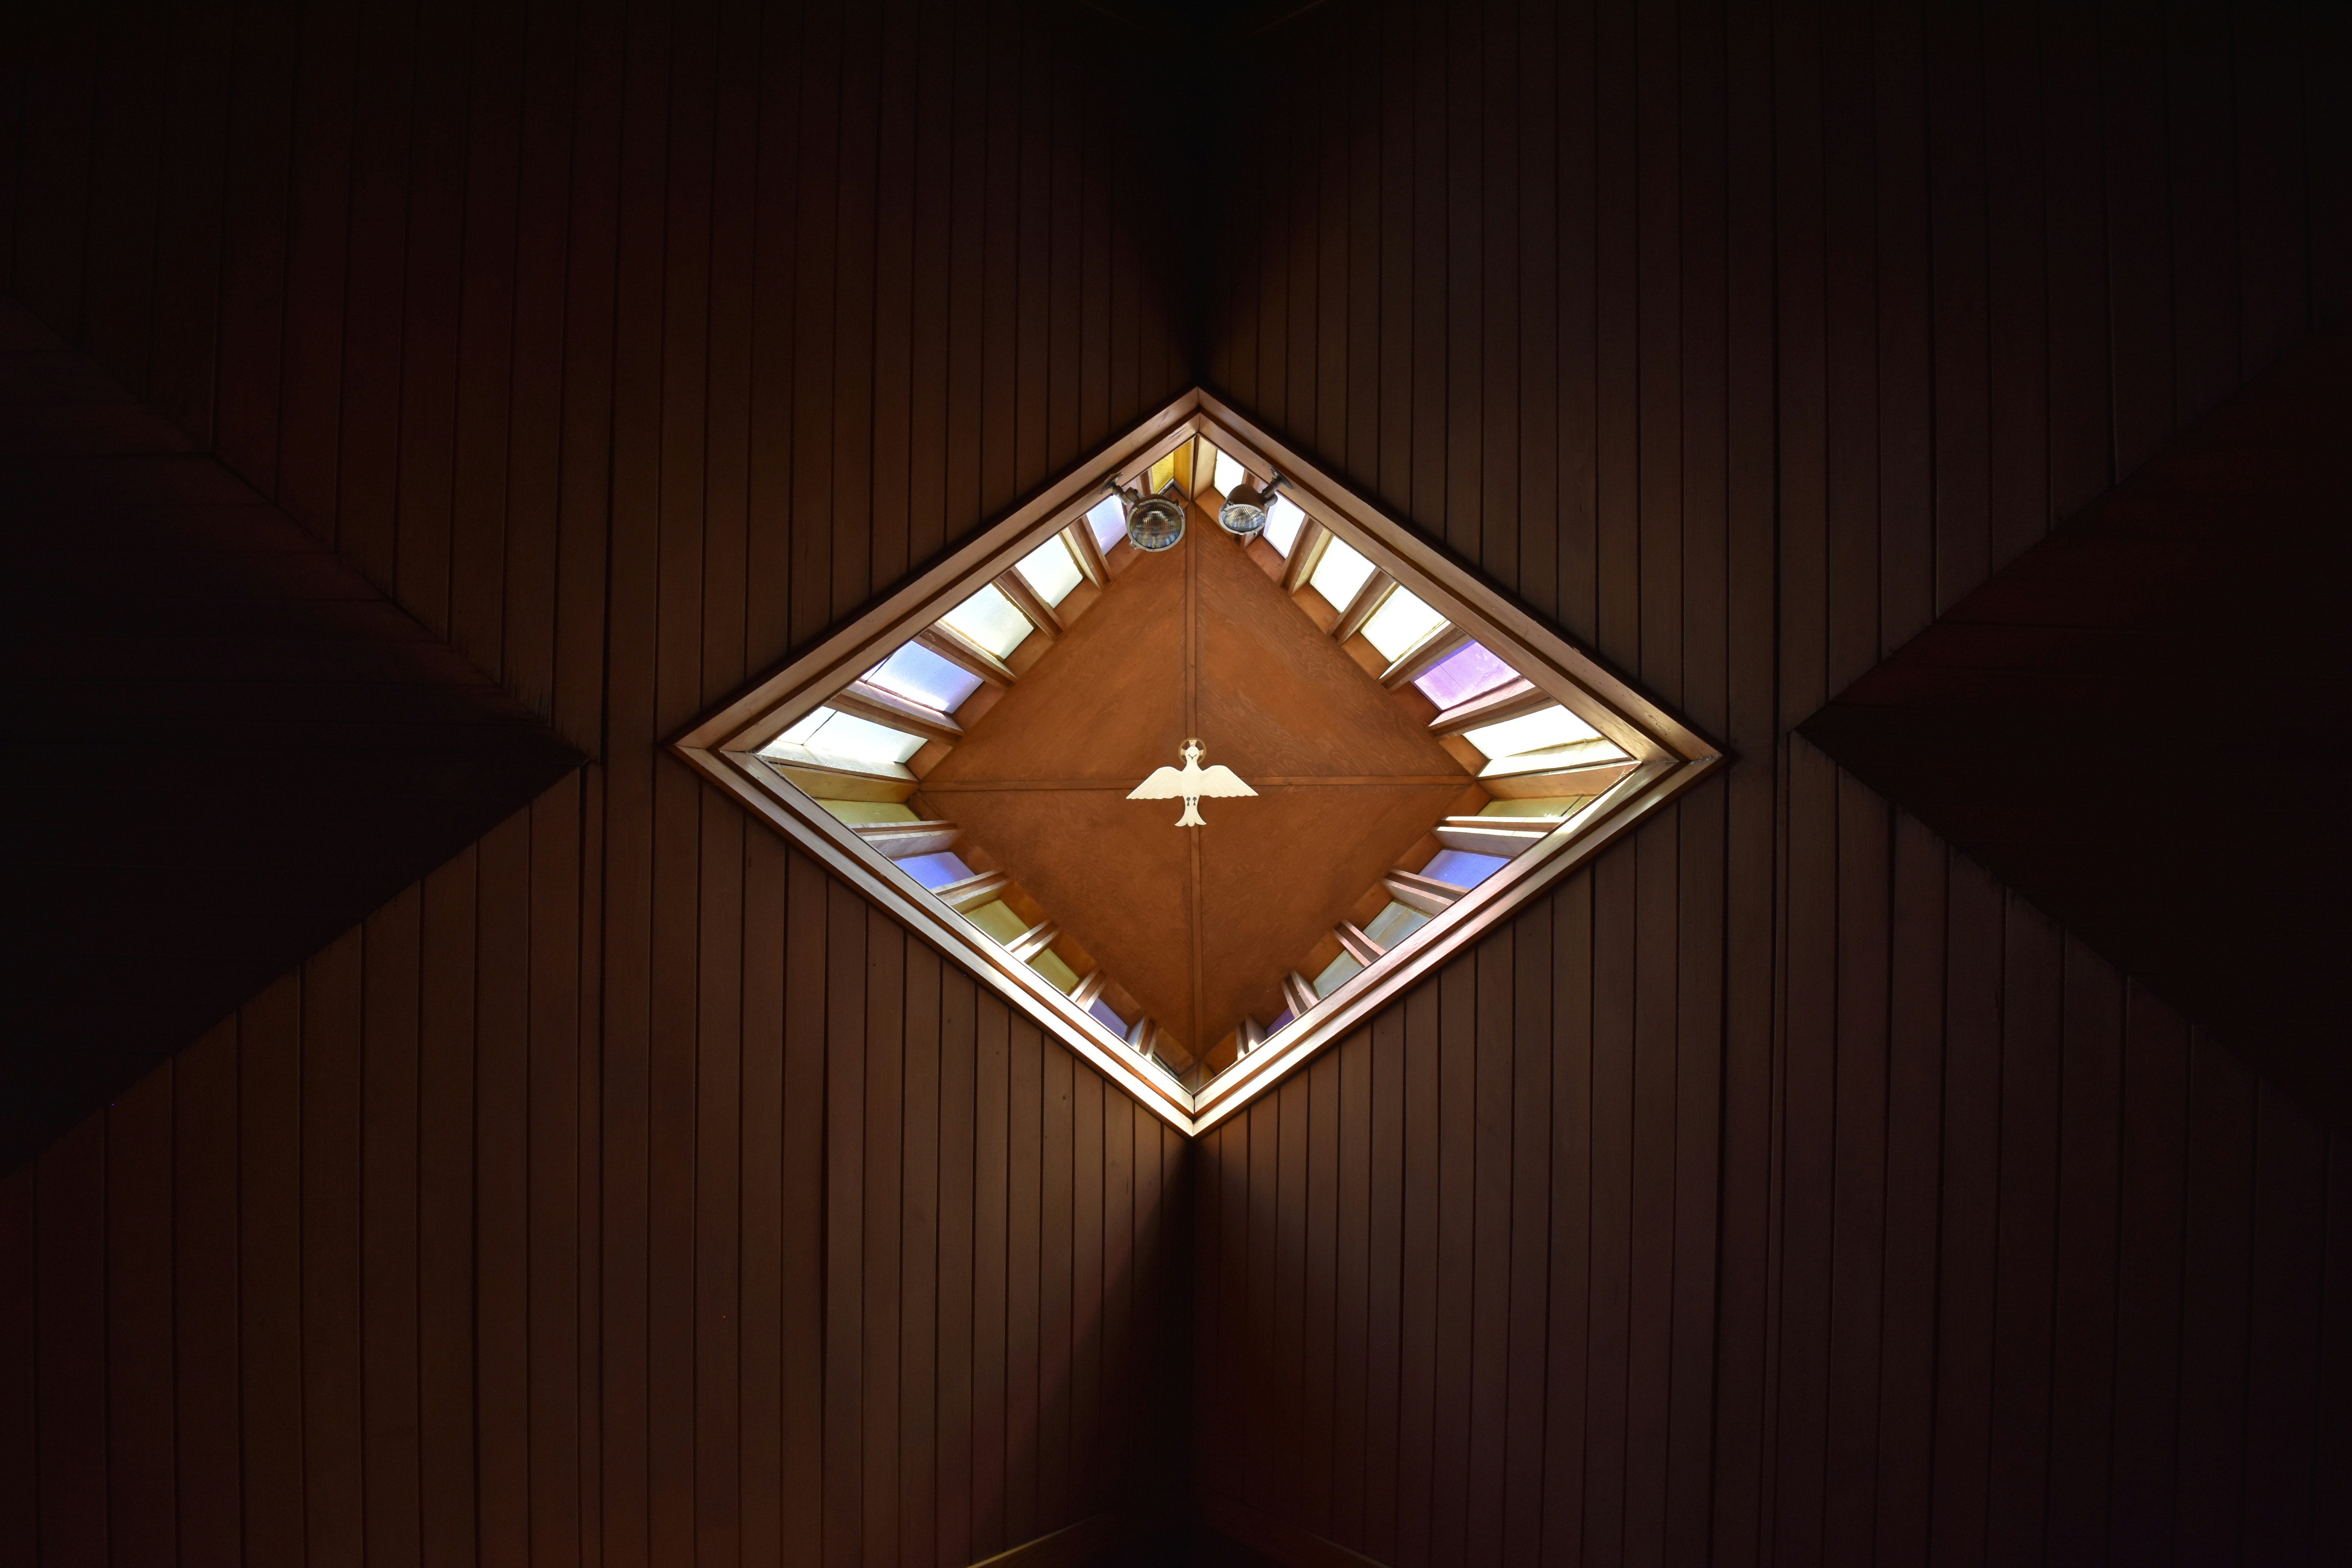 A depiction of the Holy Spirit as a dove above our sanctuary.